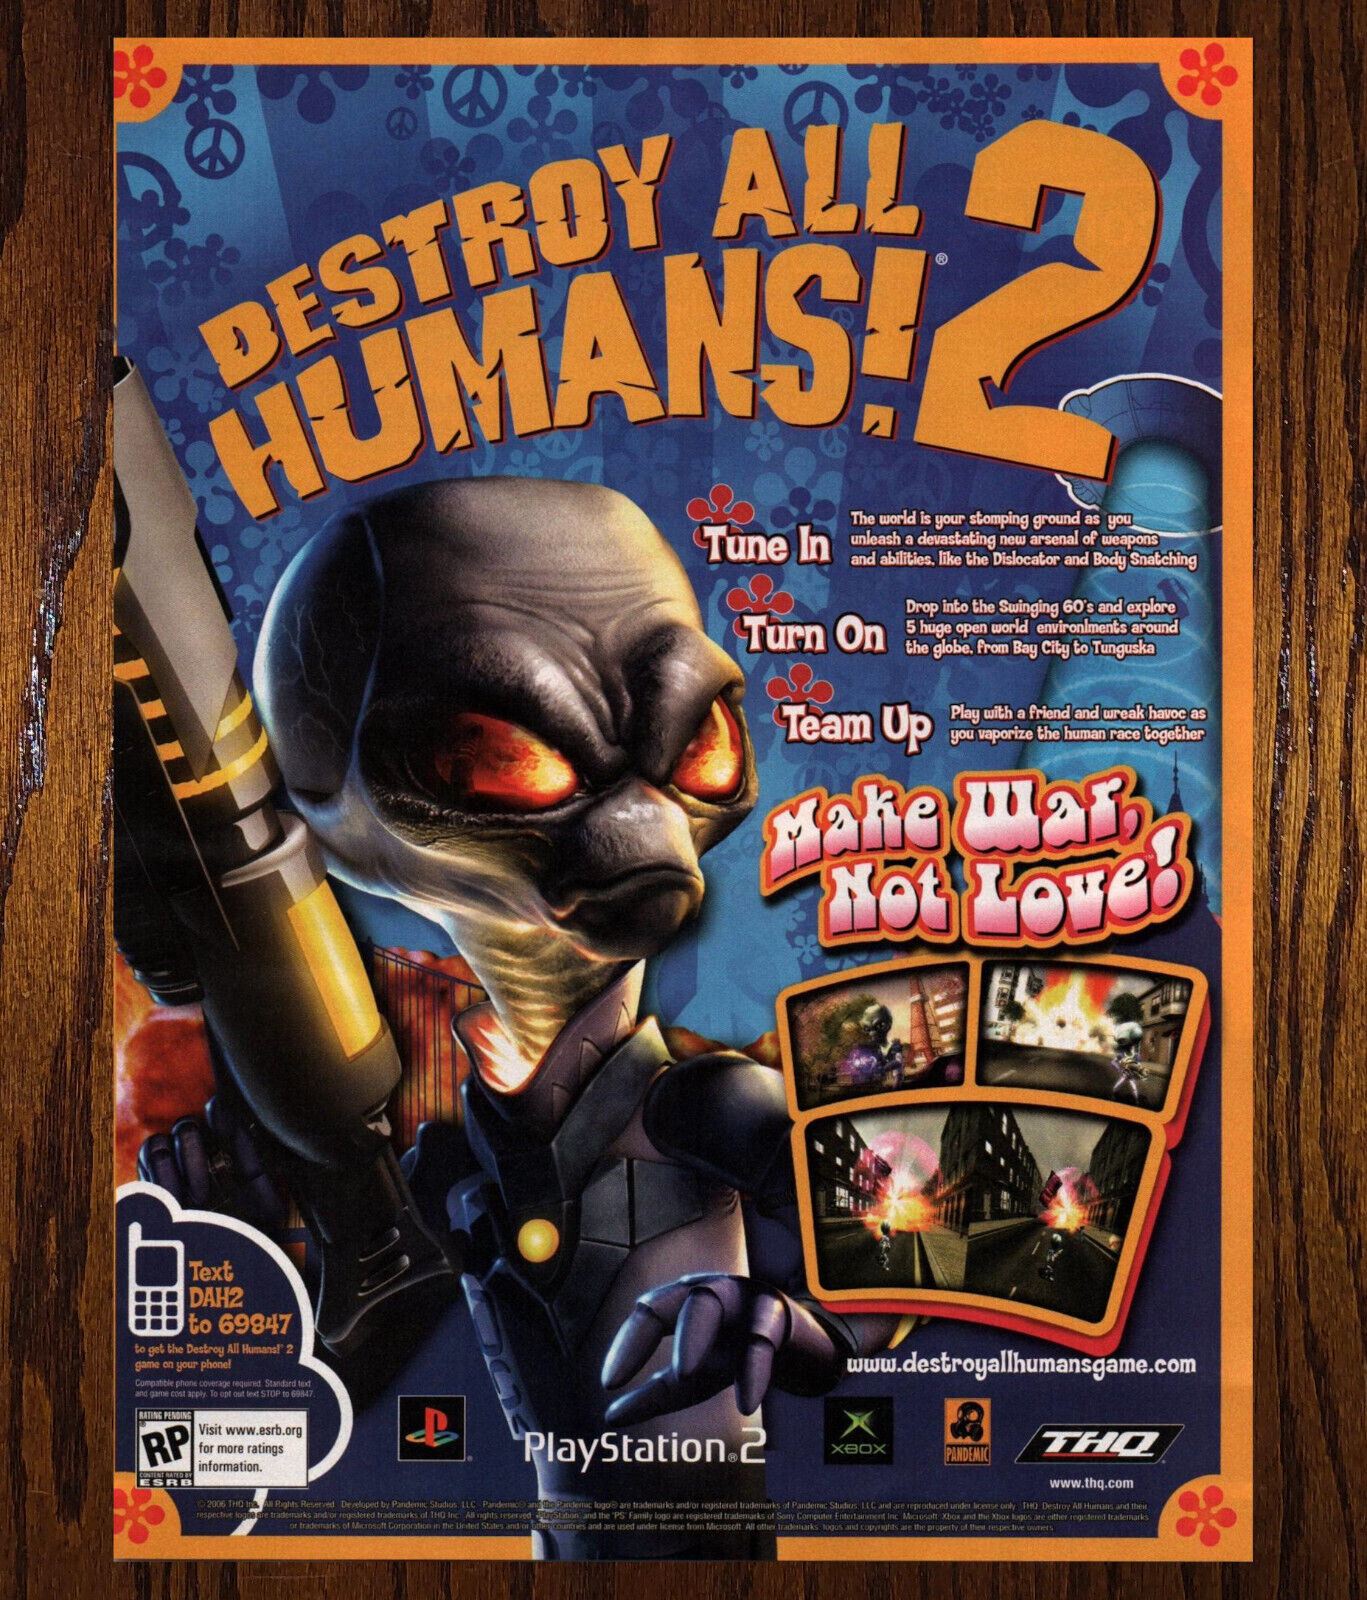 Destroy All Humans 2 THQ - Video Game Print Ad / Poster Promo Art 2006